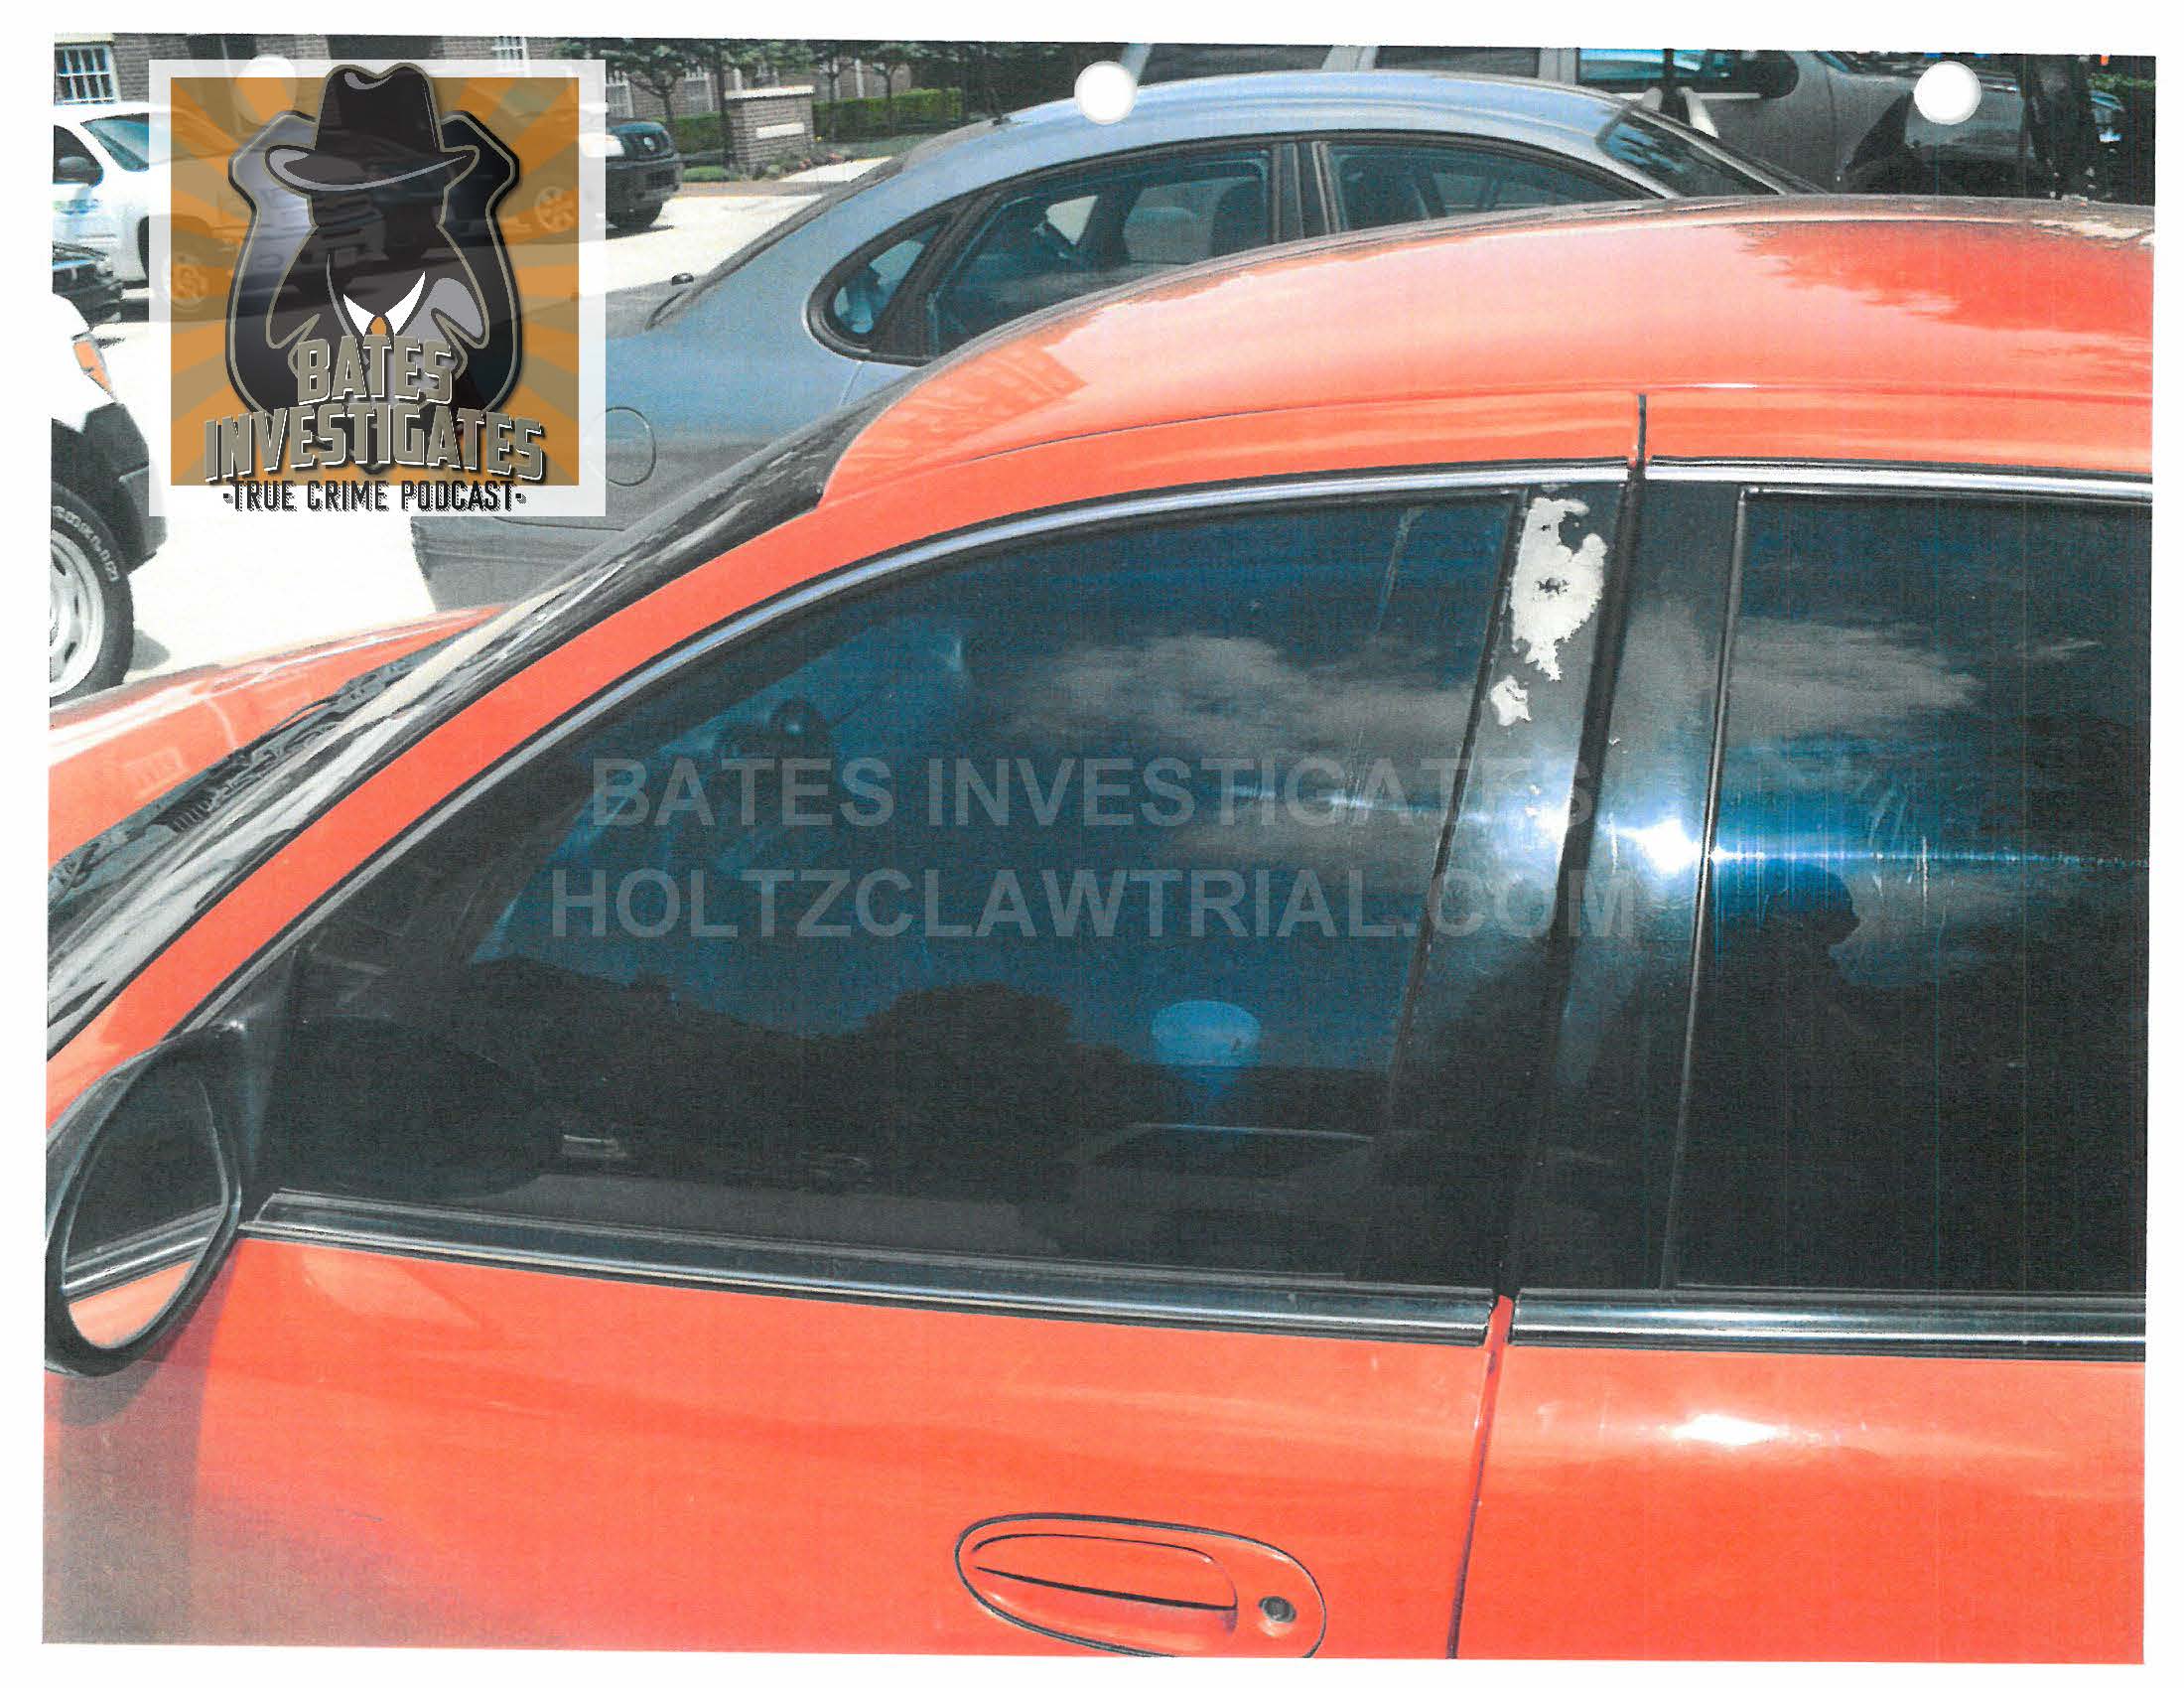 Holtzclaw Podcast Ep02 - Ligons Car - Watermarked_Page_05.jpg